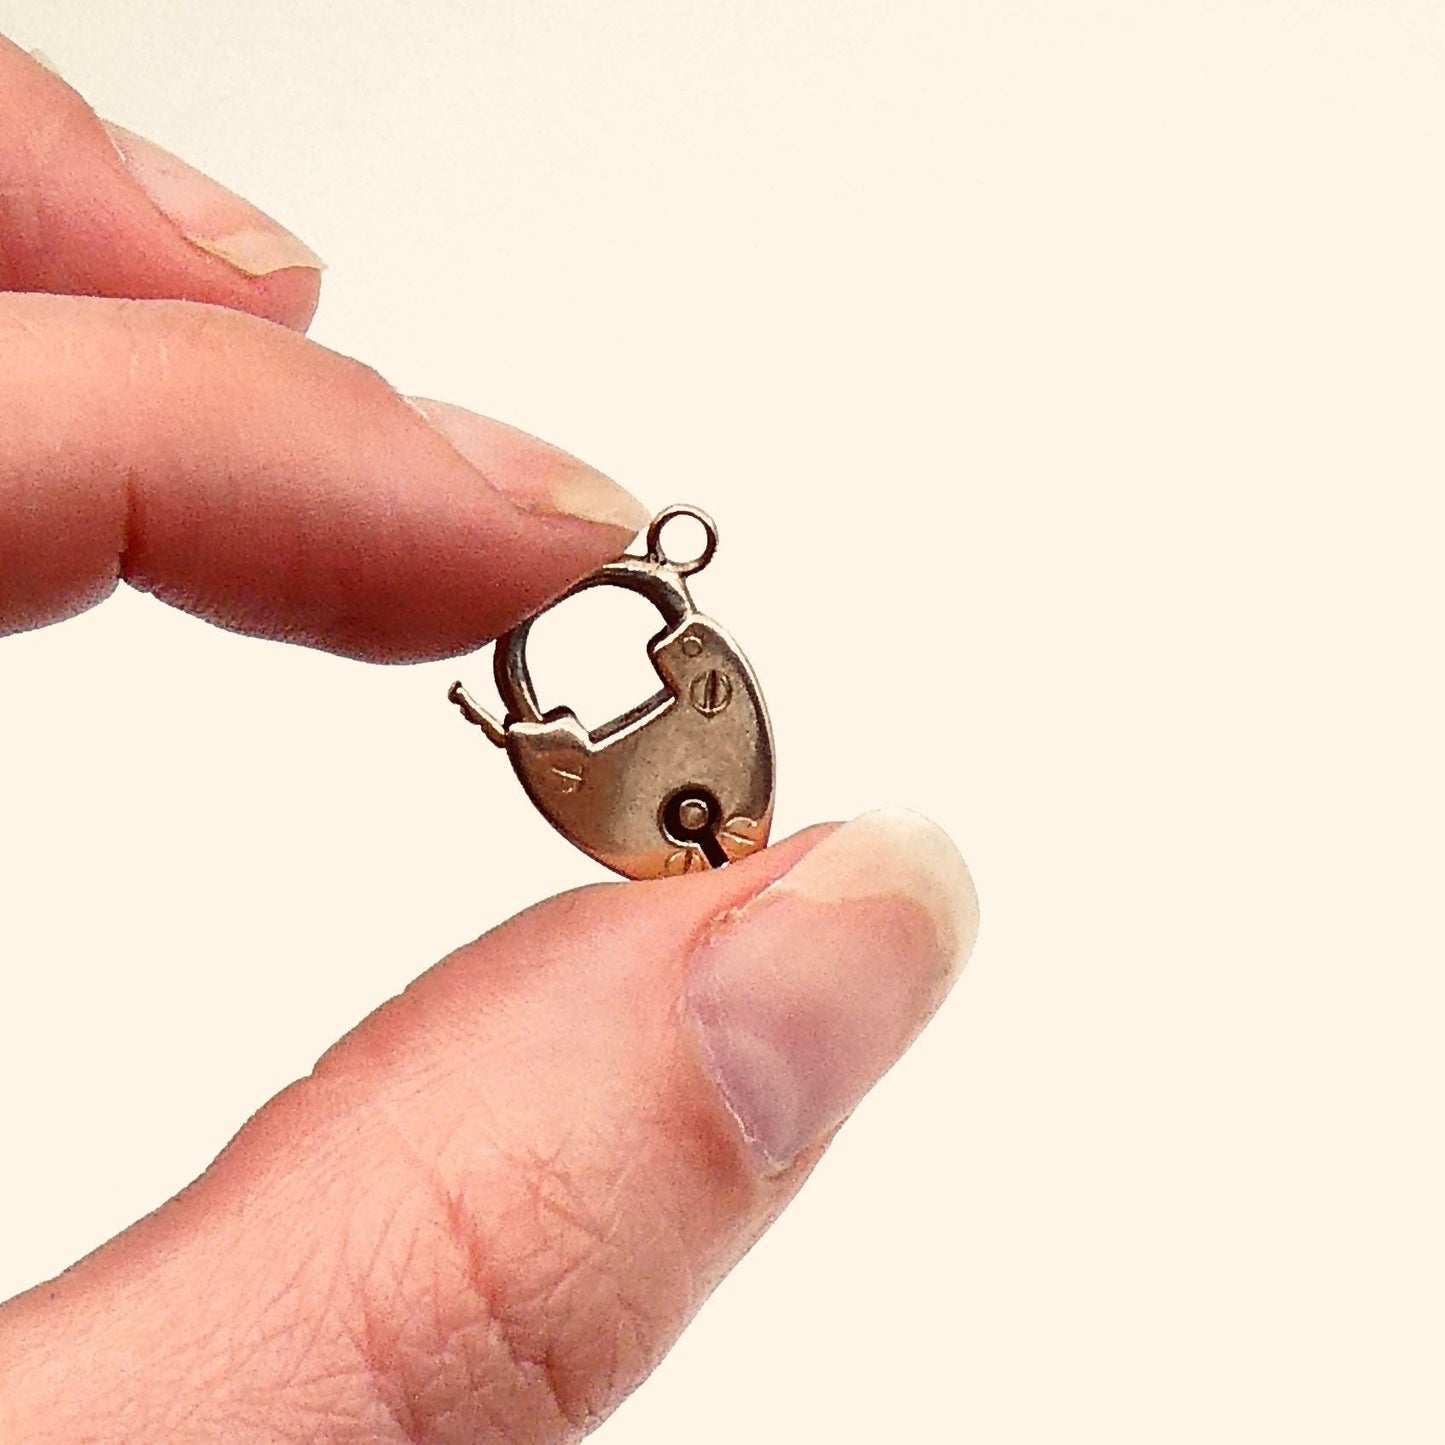 A small vintage 9kt gold padlock with rivets and a ring to hang on a chain, a rose gold toned padlock. - Collected